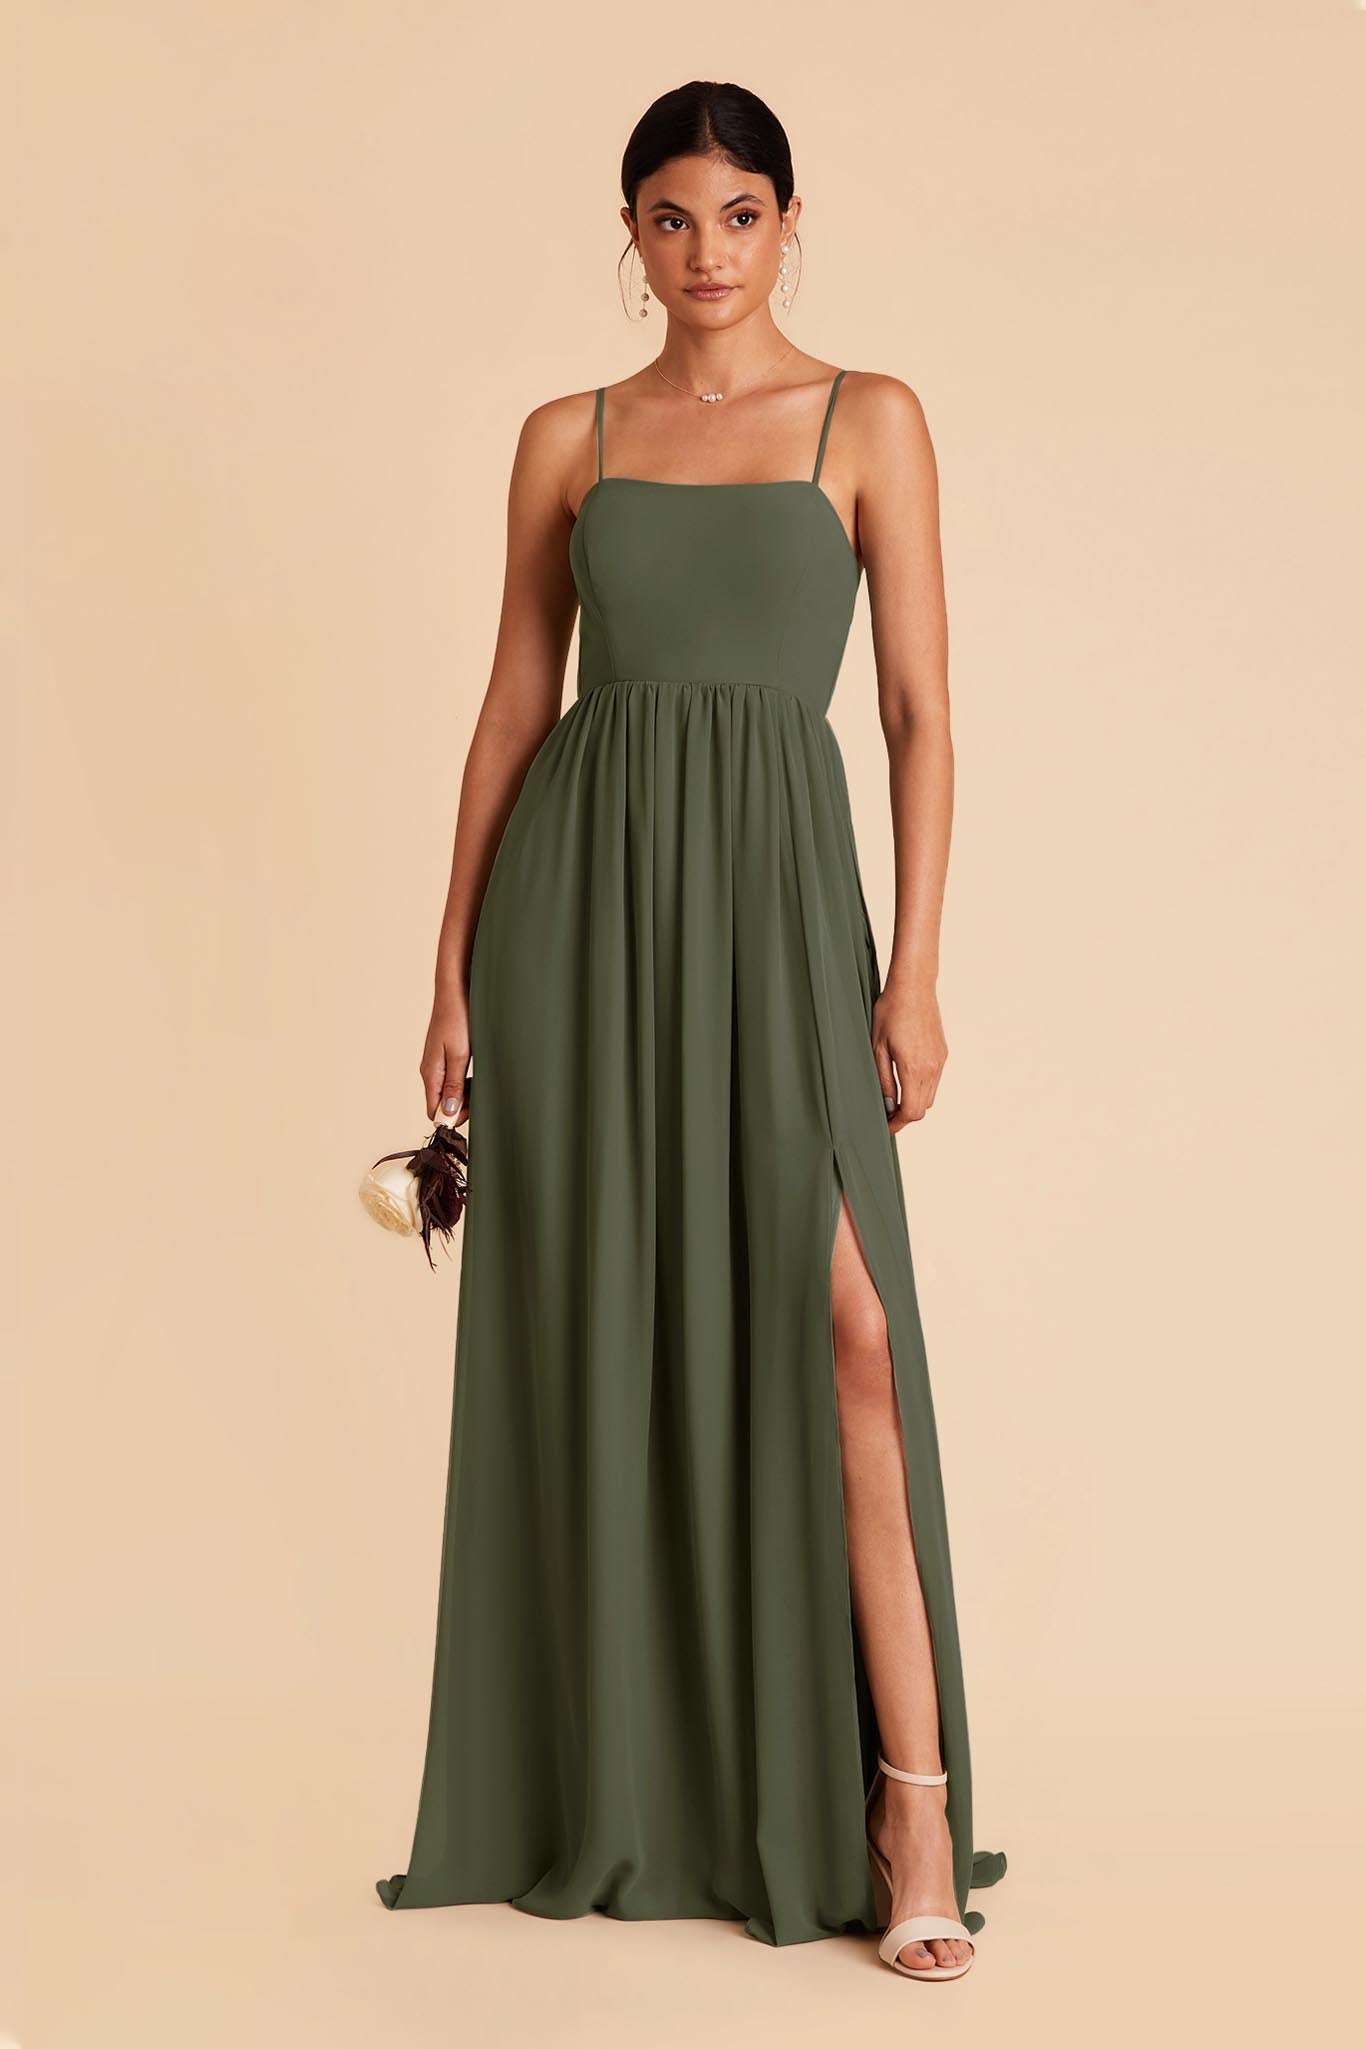 Olive August Convertible Dress by Birdy Grey